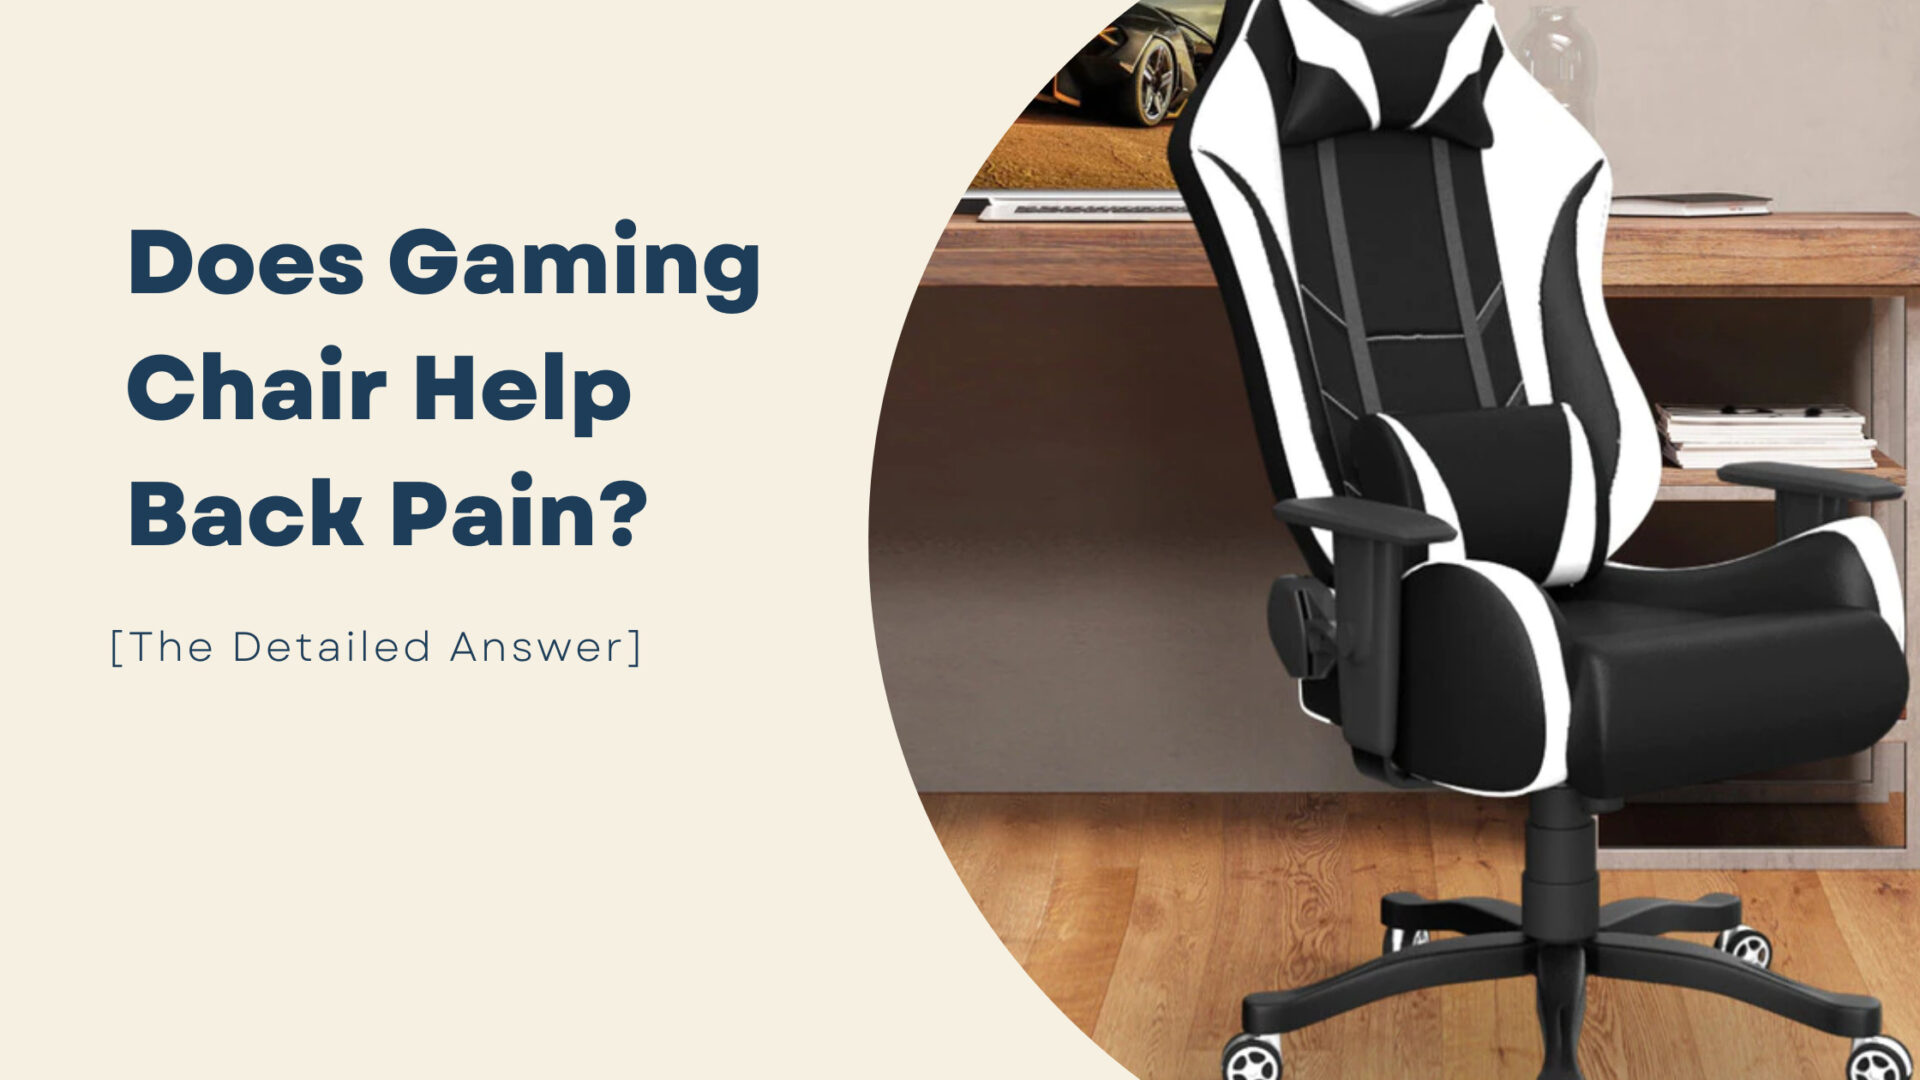 Does Gaming Chair Help Back Pain